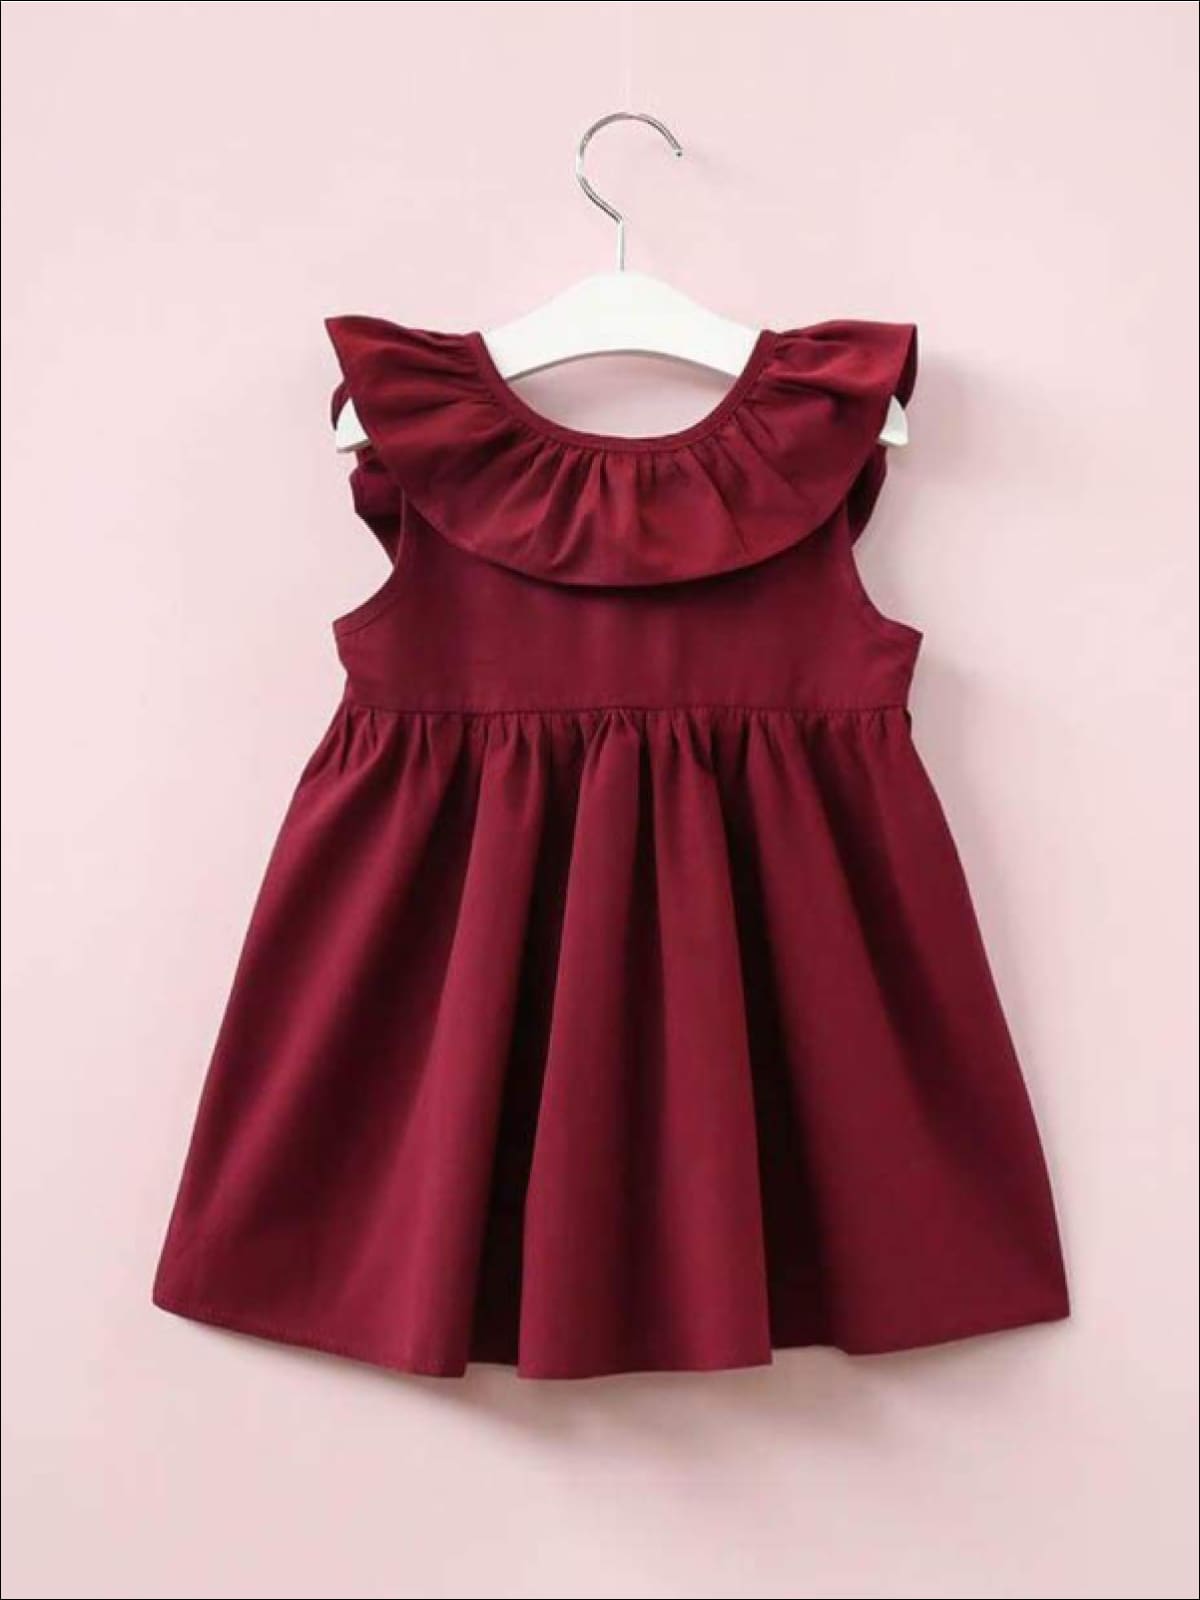 Girls Casual Ruffled Flutter Sleeve Dress with a Bow - Red wine / 2T - Girls Spring Casual Dress